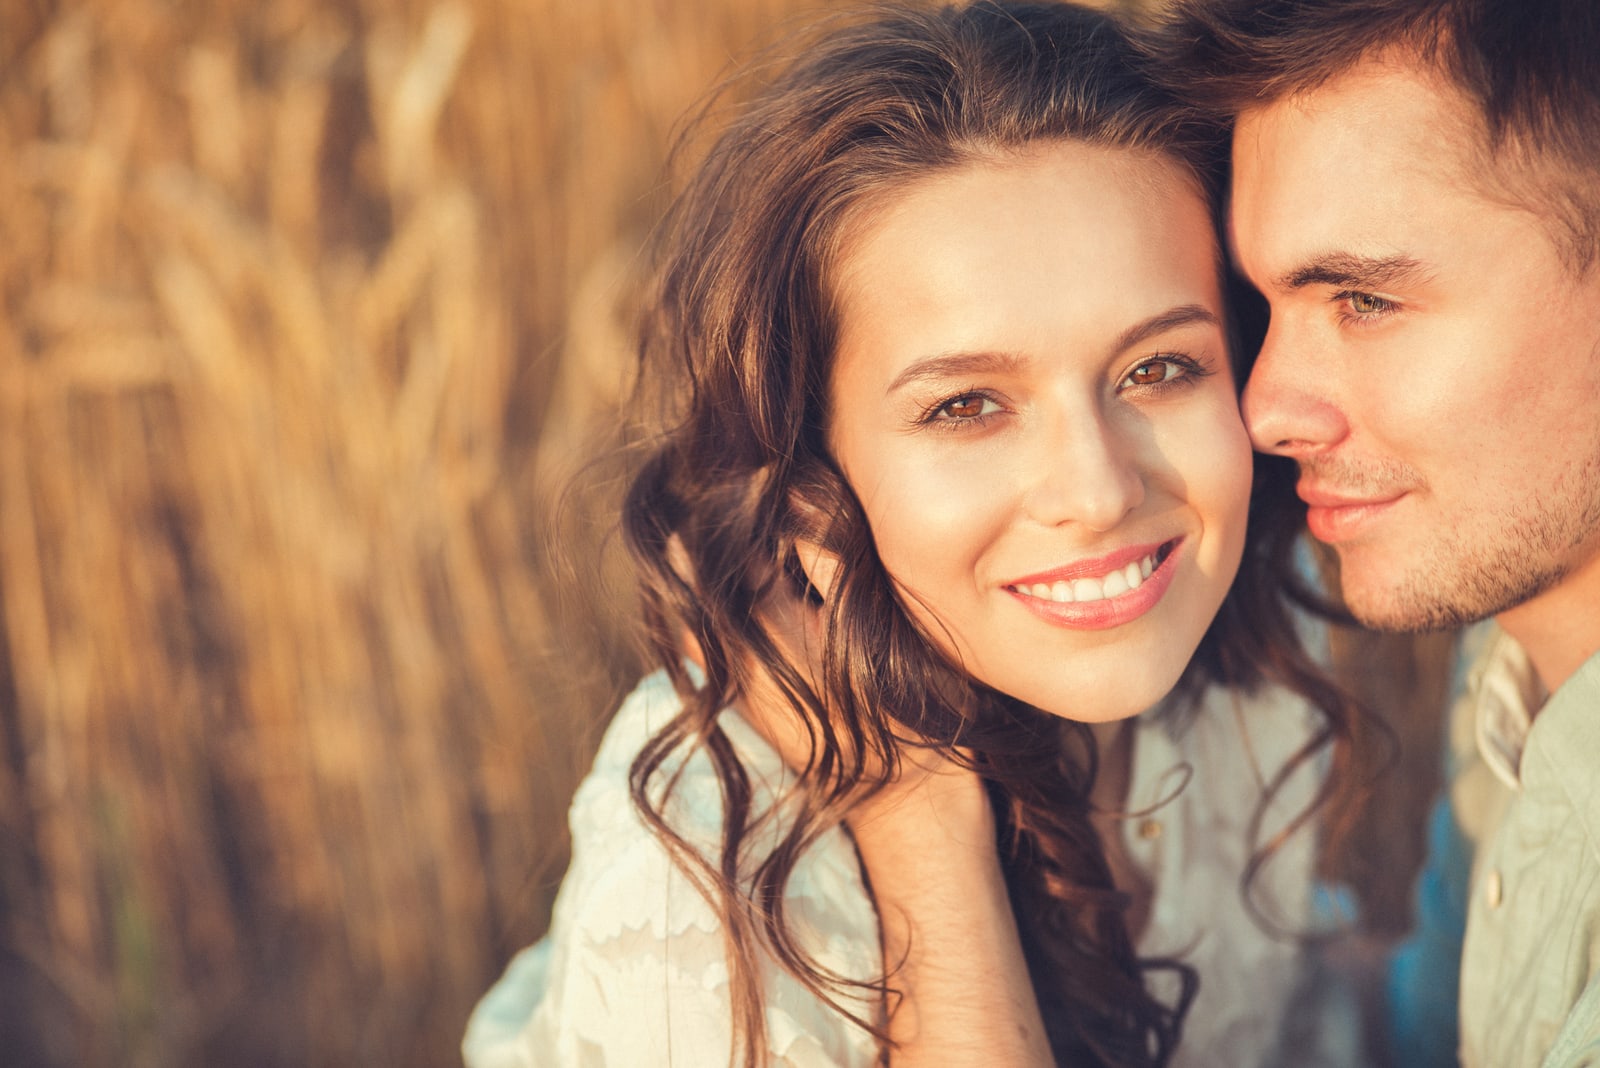 7 Irrelevant Things That Shouldn’t Matter In A Relationship